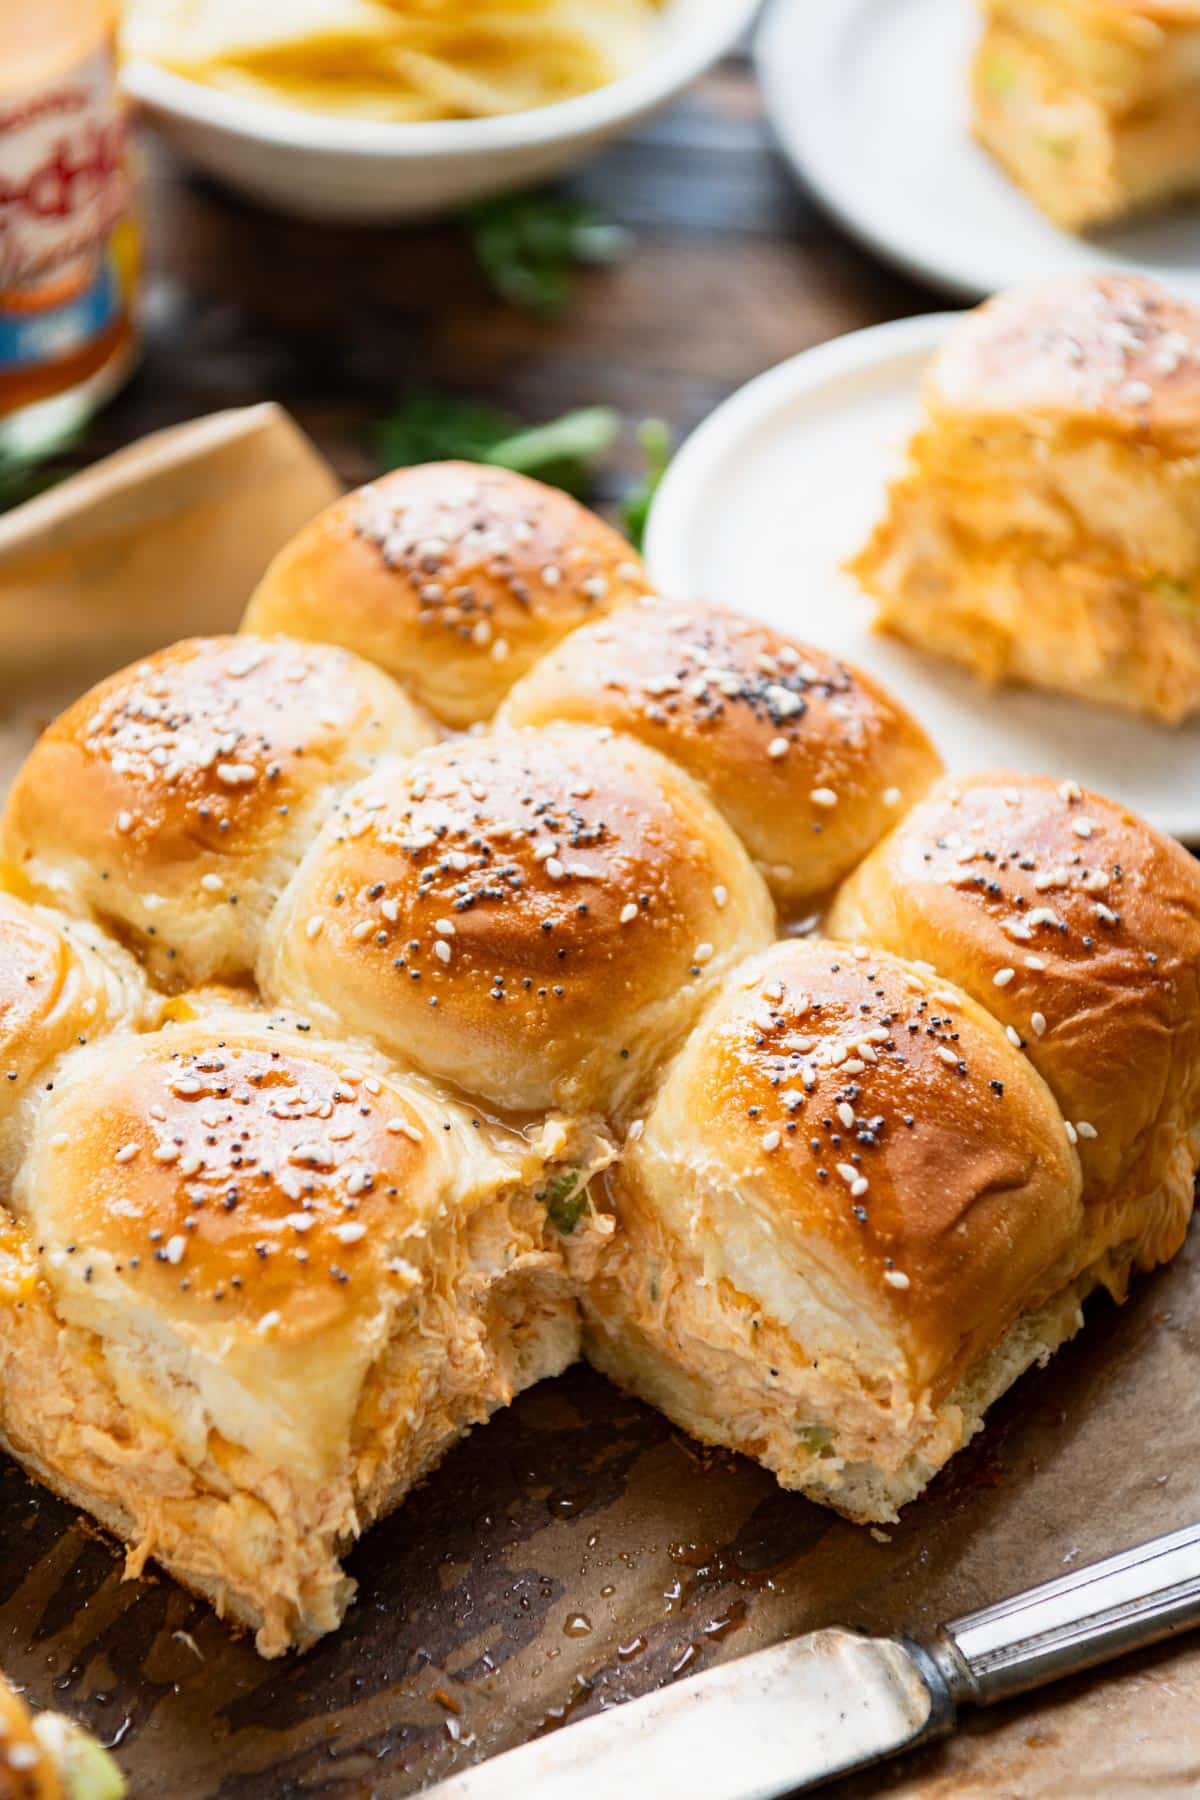 Tray of the best buffalo chicken sliders recipe served on a wooden table with potato chips and salad.